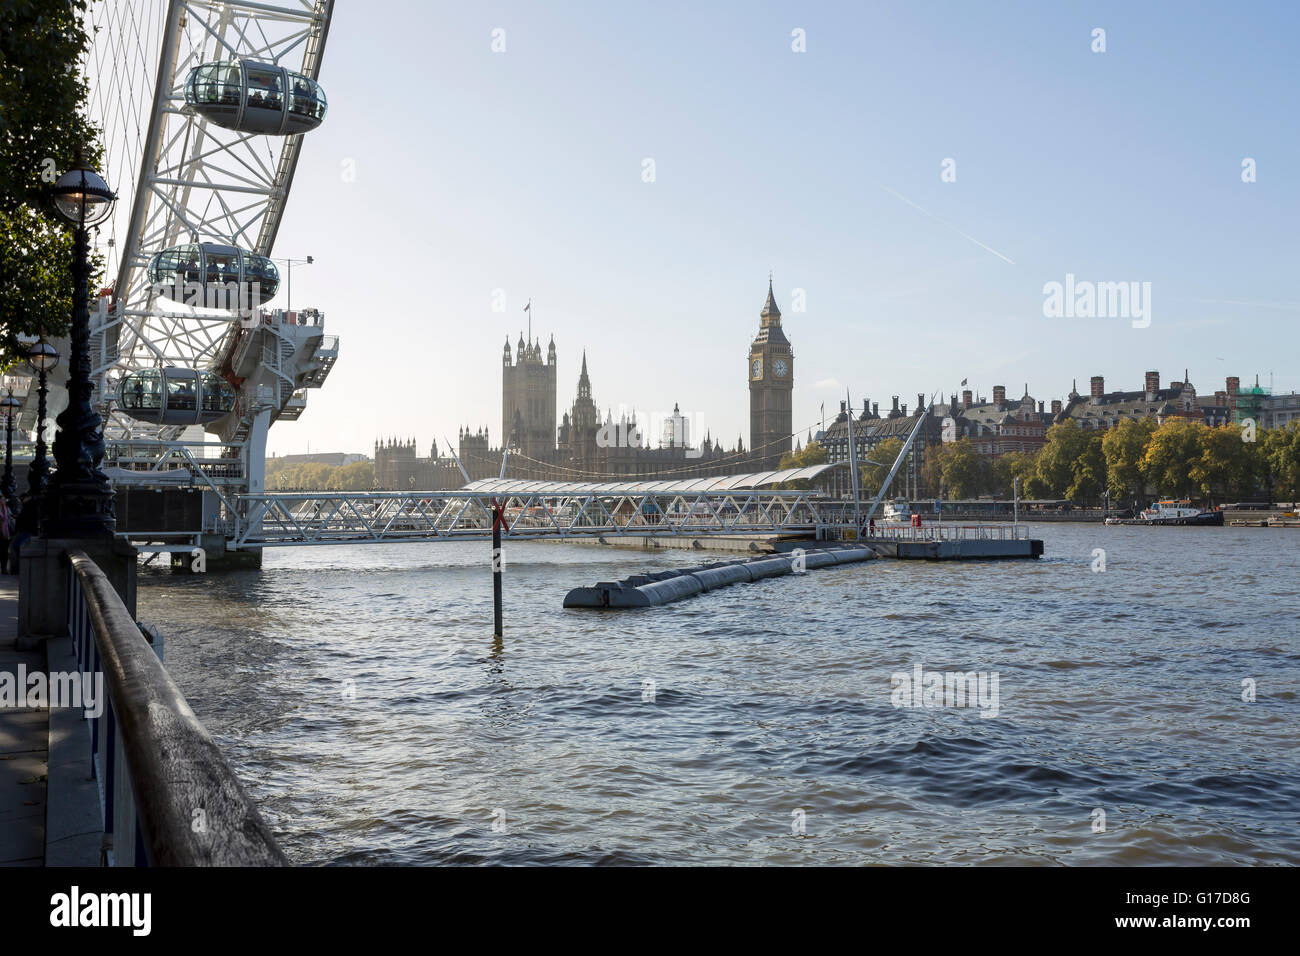 Festival Pier with London Eye and the Houses of Parliament on the Thames riverbanks in London at daylight Stock Photo